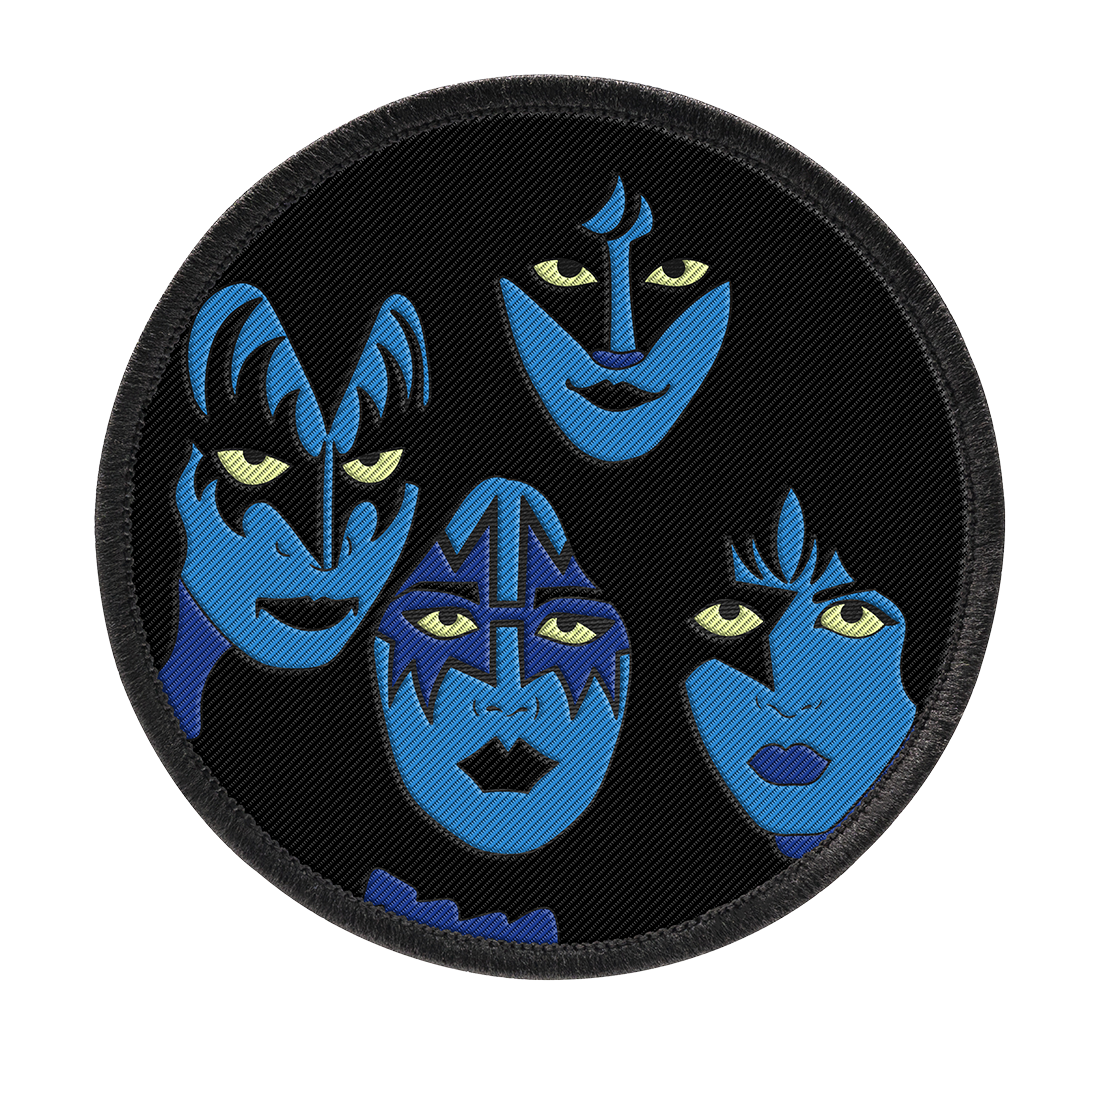 Kiss - Creatures of the Night Patch Set